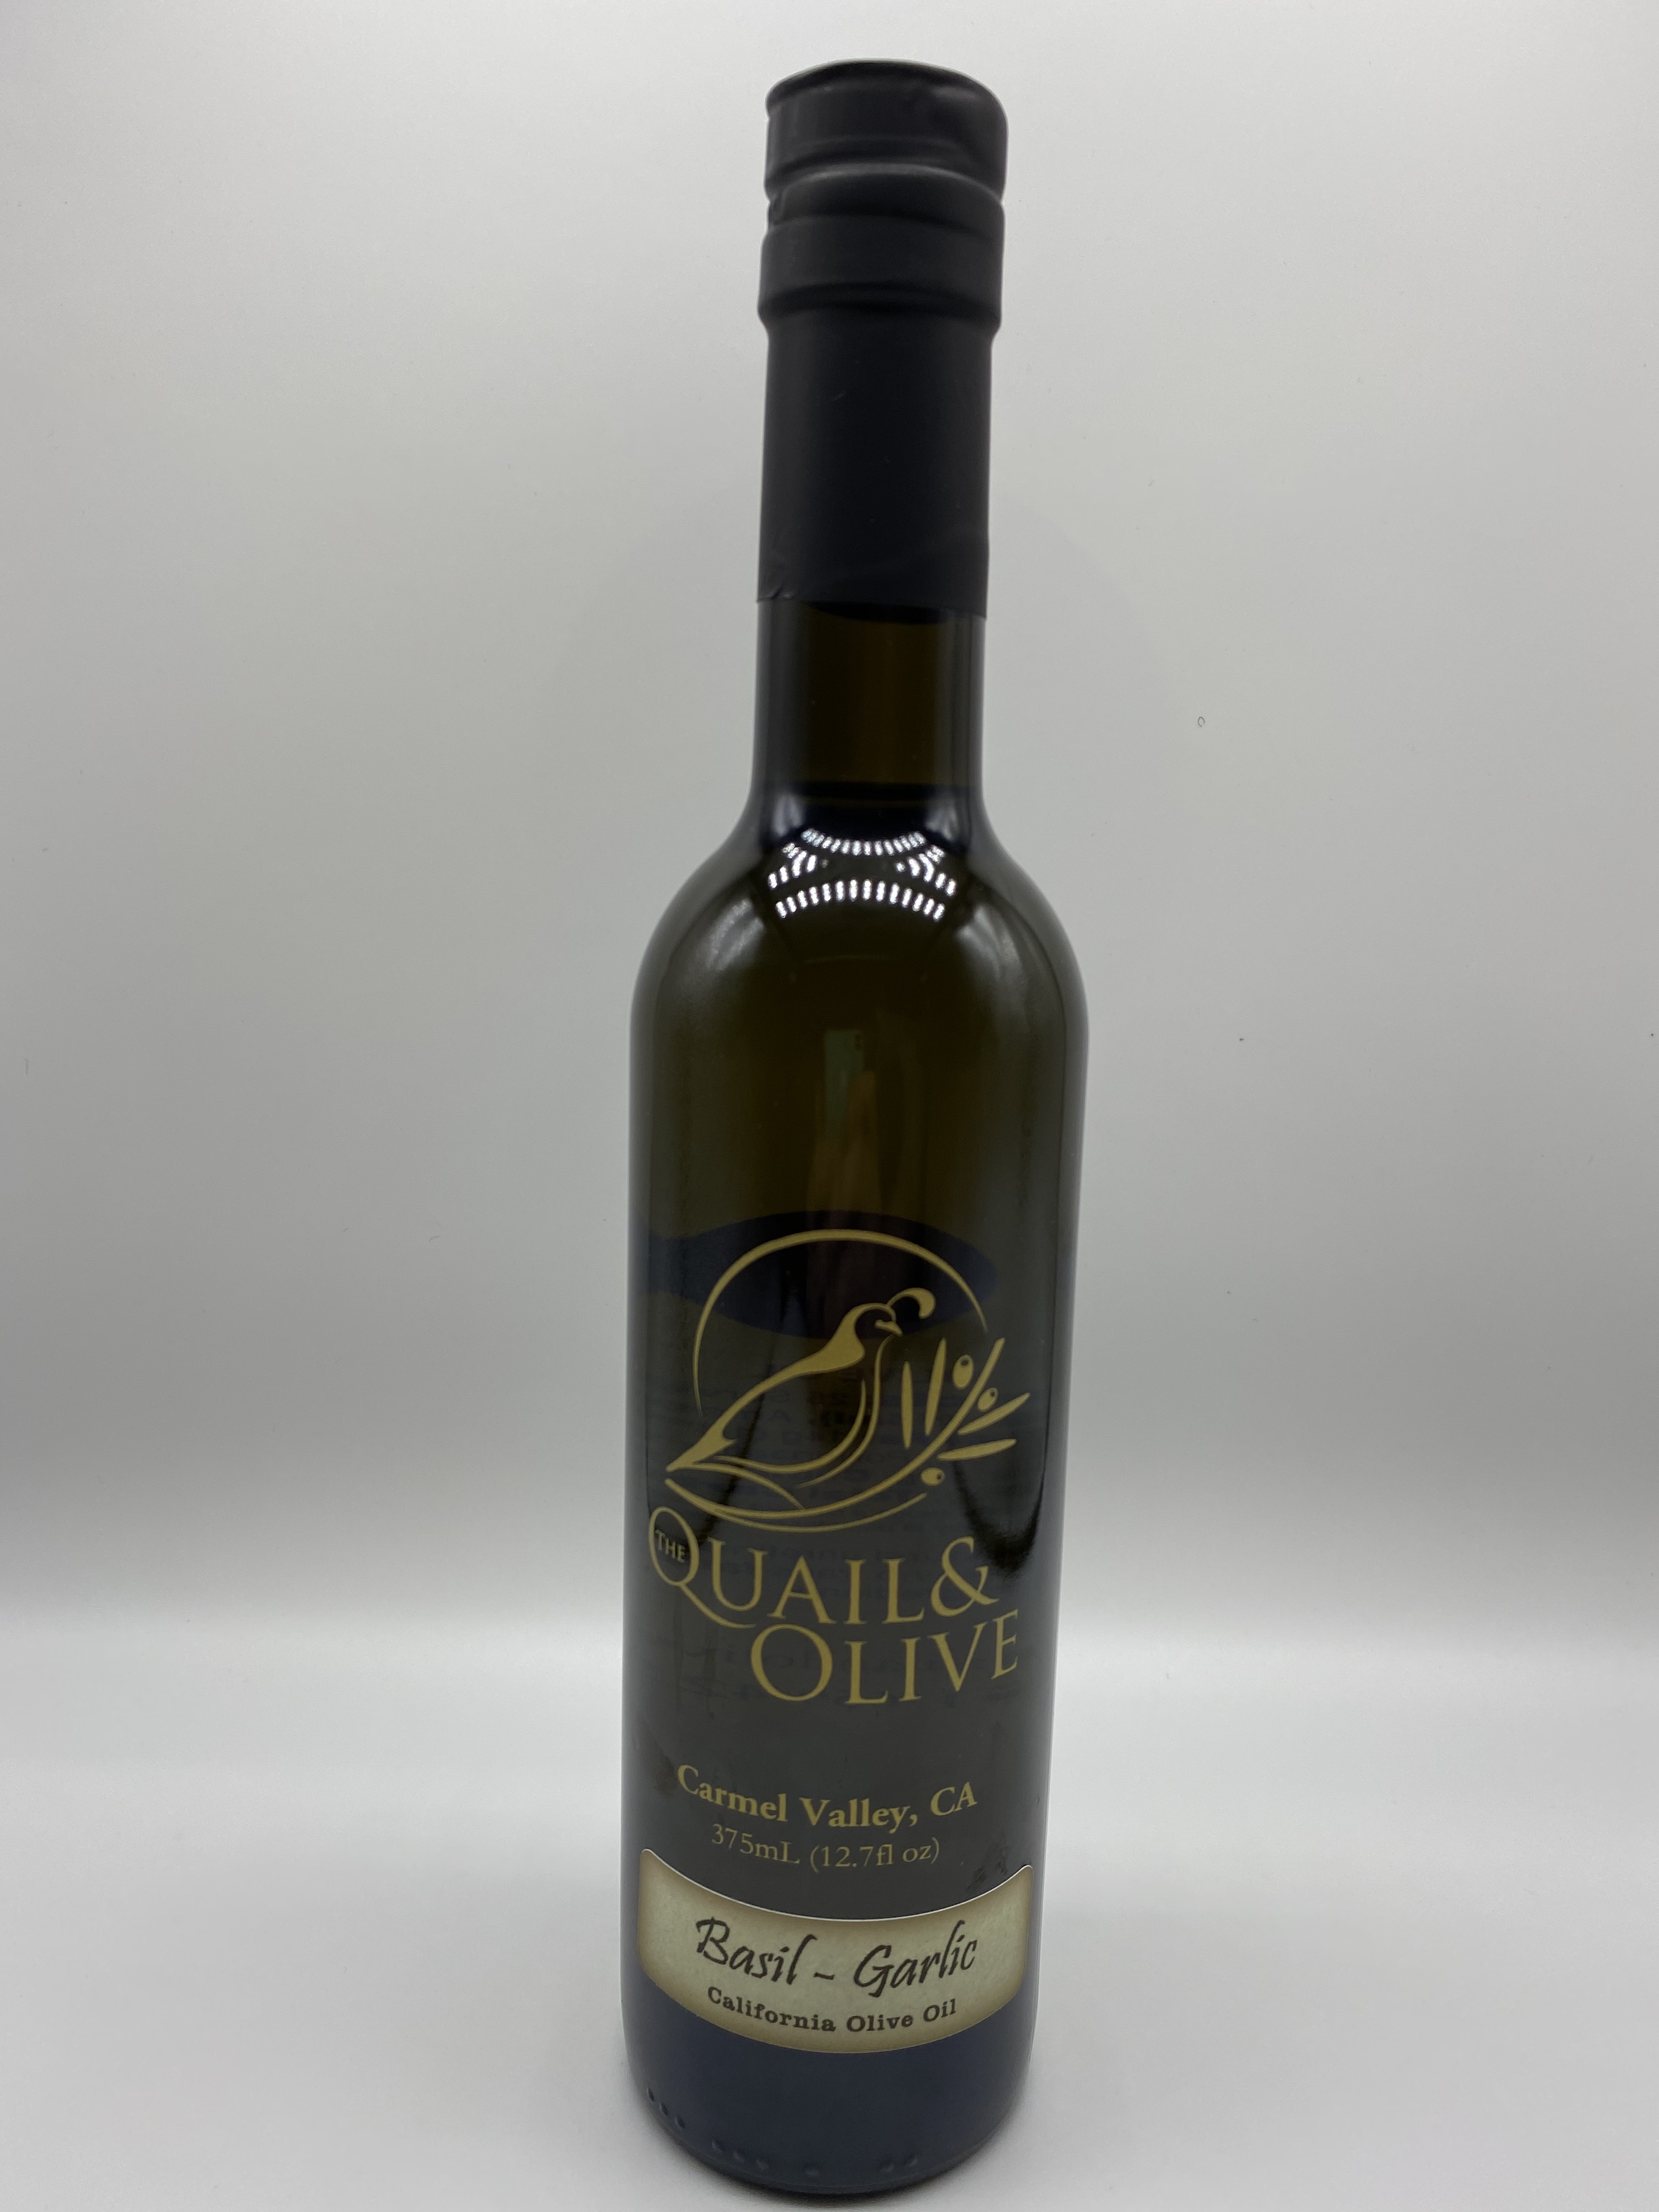 Product Image for Basil Garlic Olive Oil